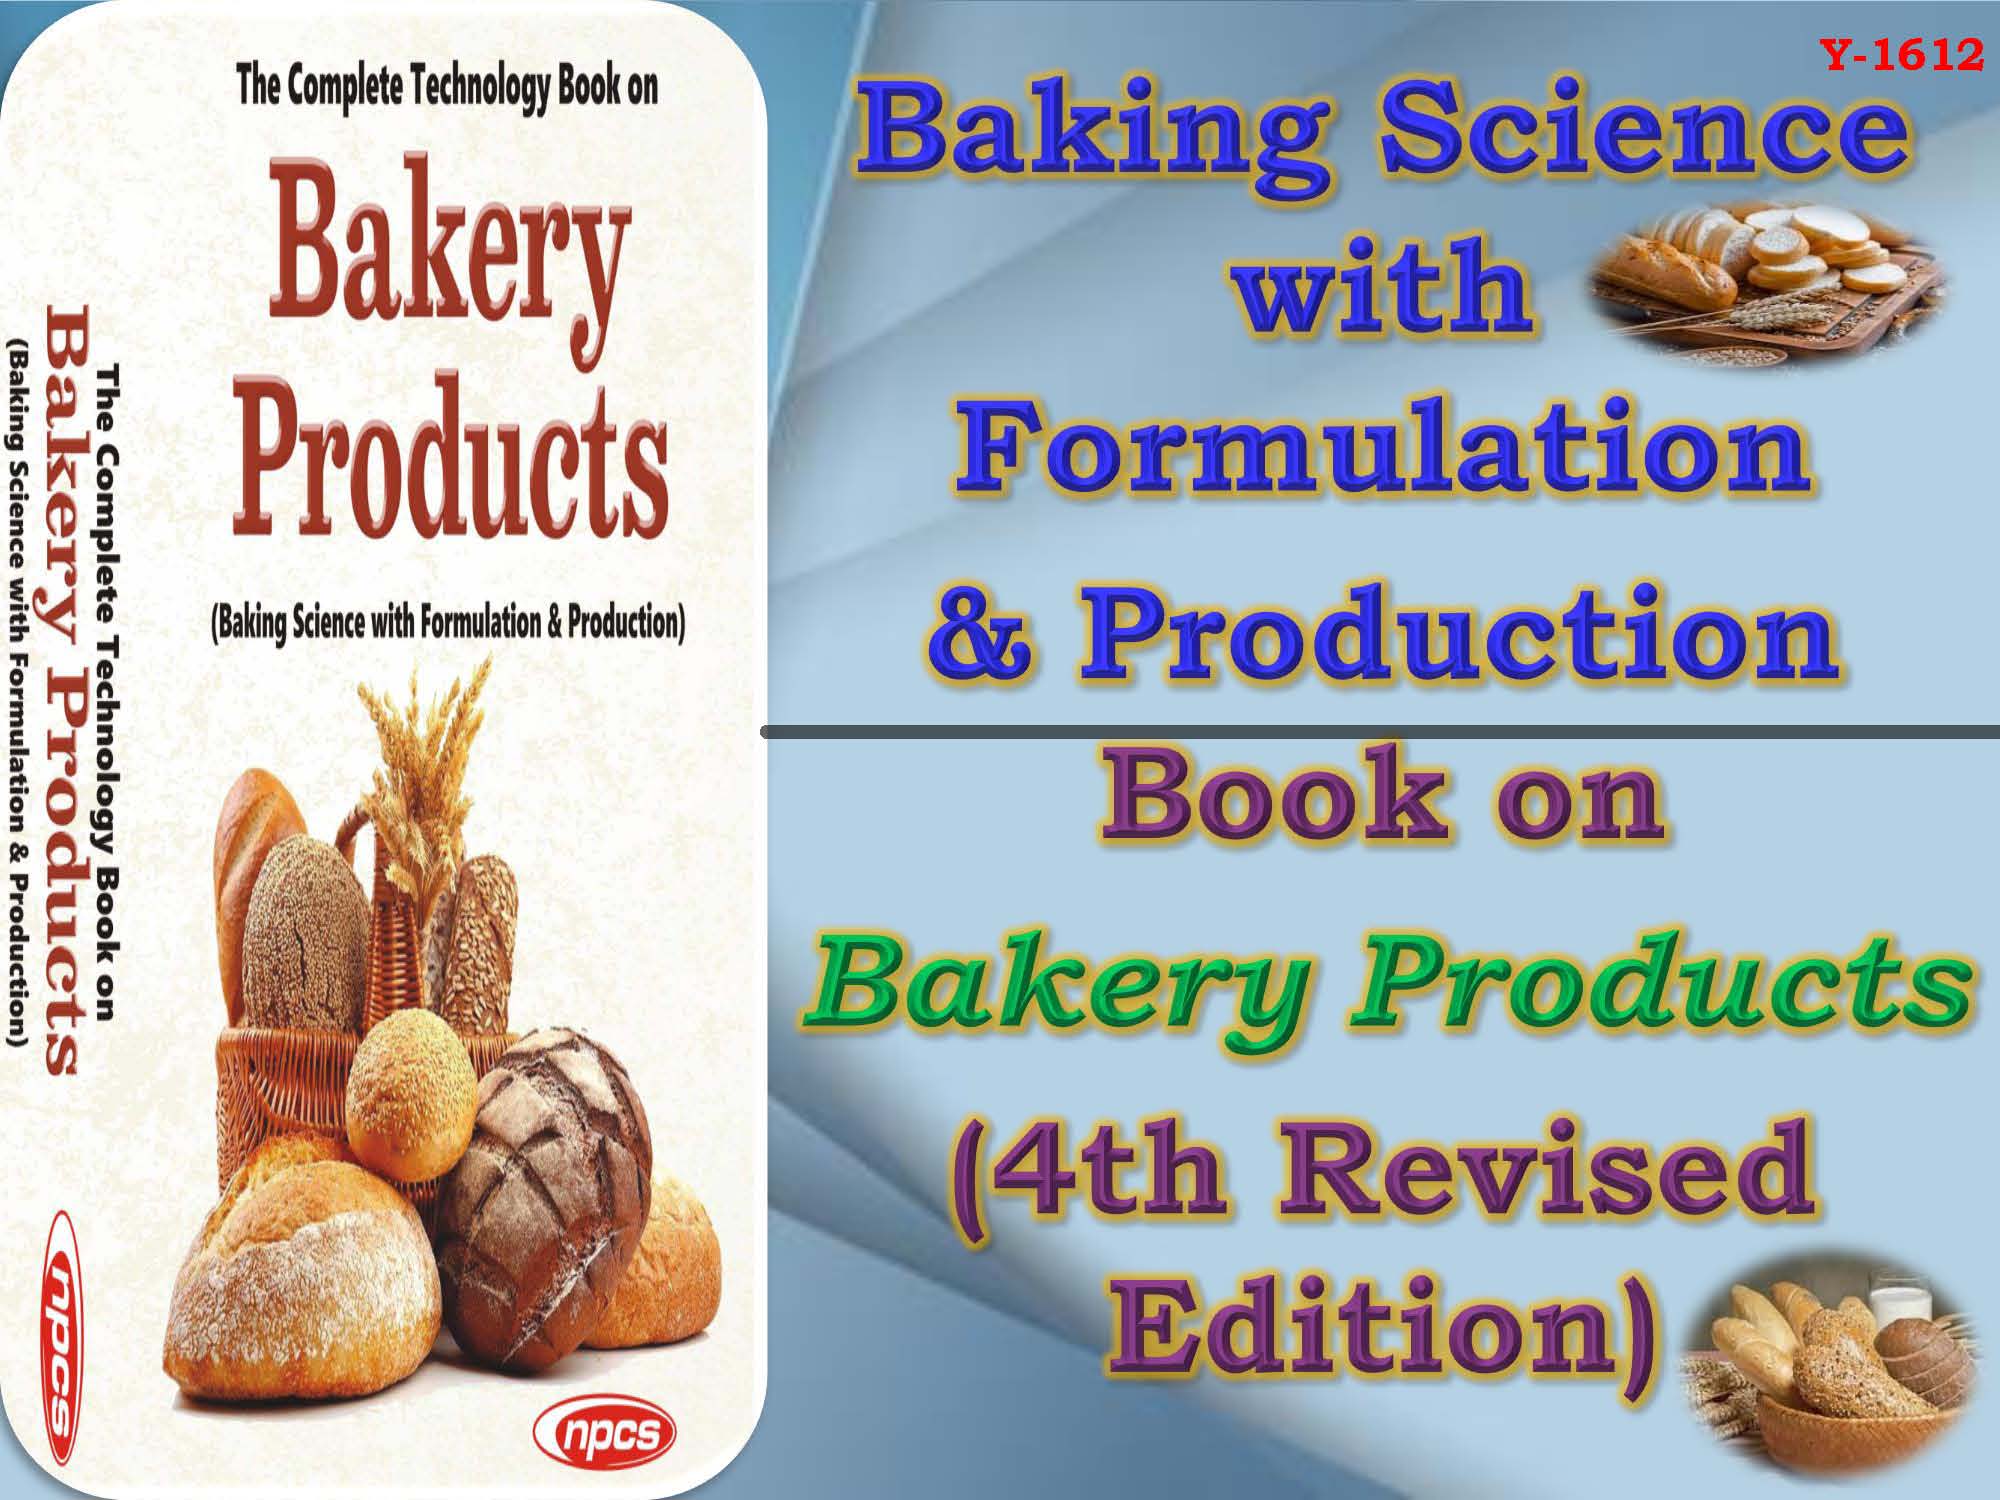 Book on Bakery Products (4th Revised Edition)